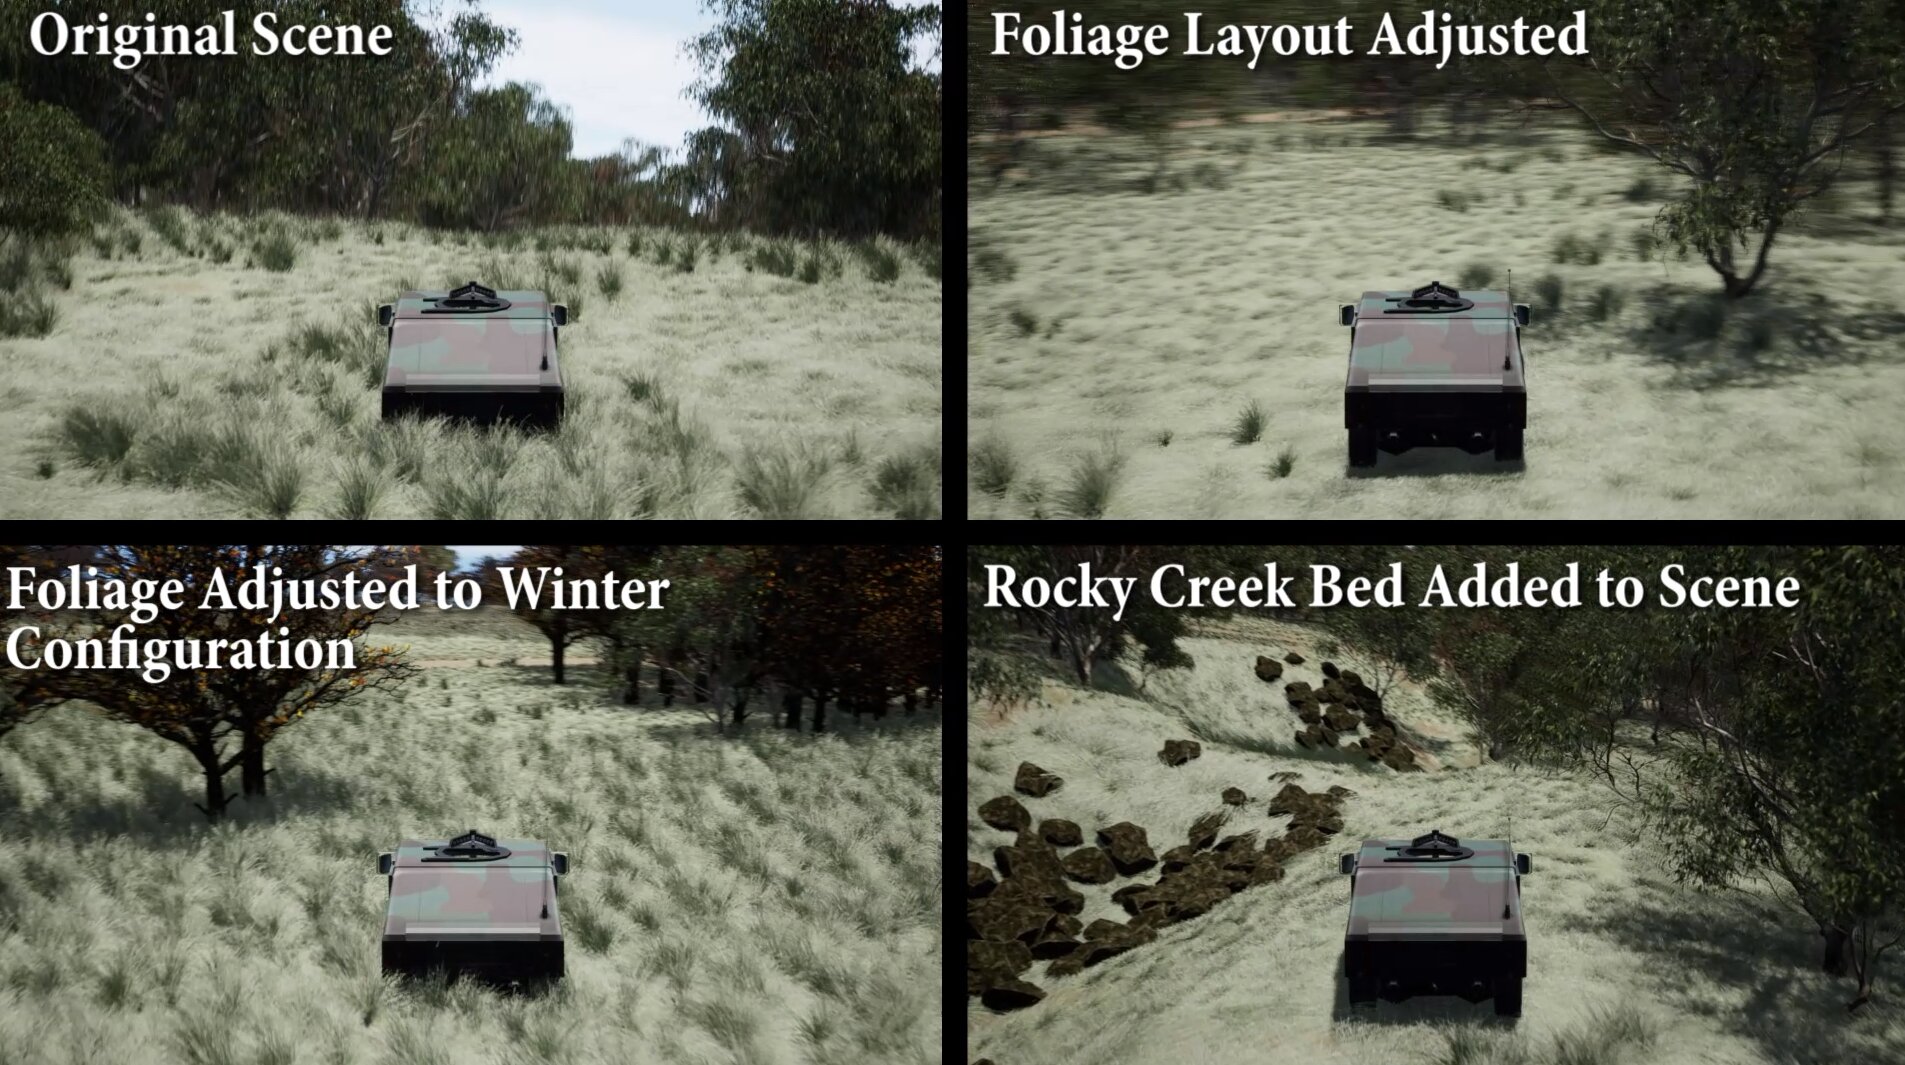 Testing automated vehicles in virtual off-road environments